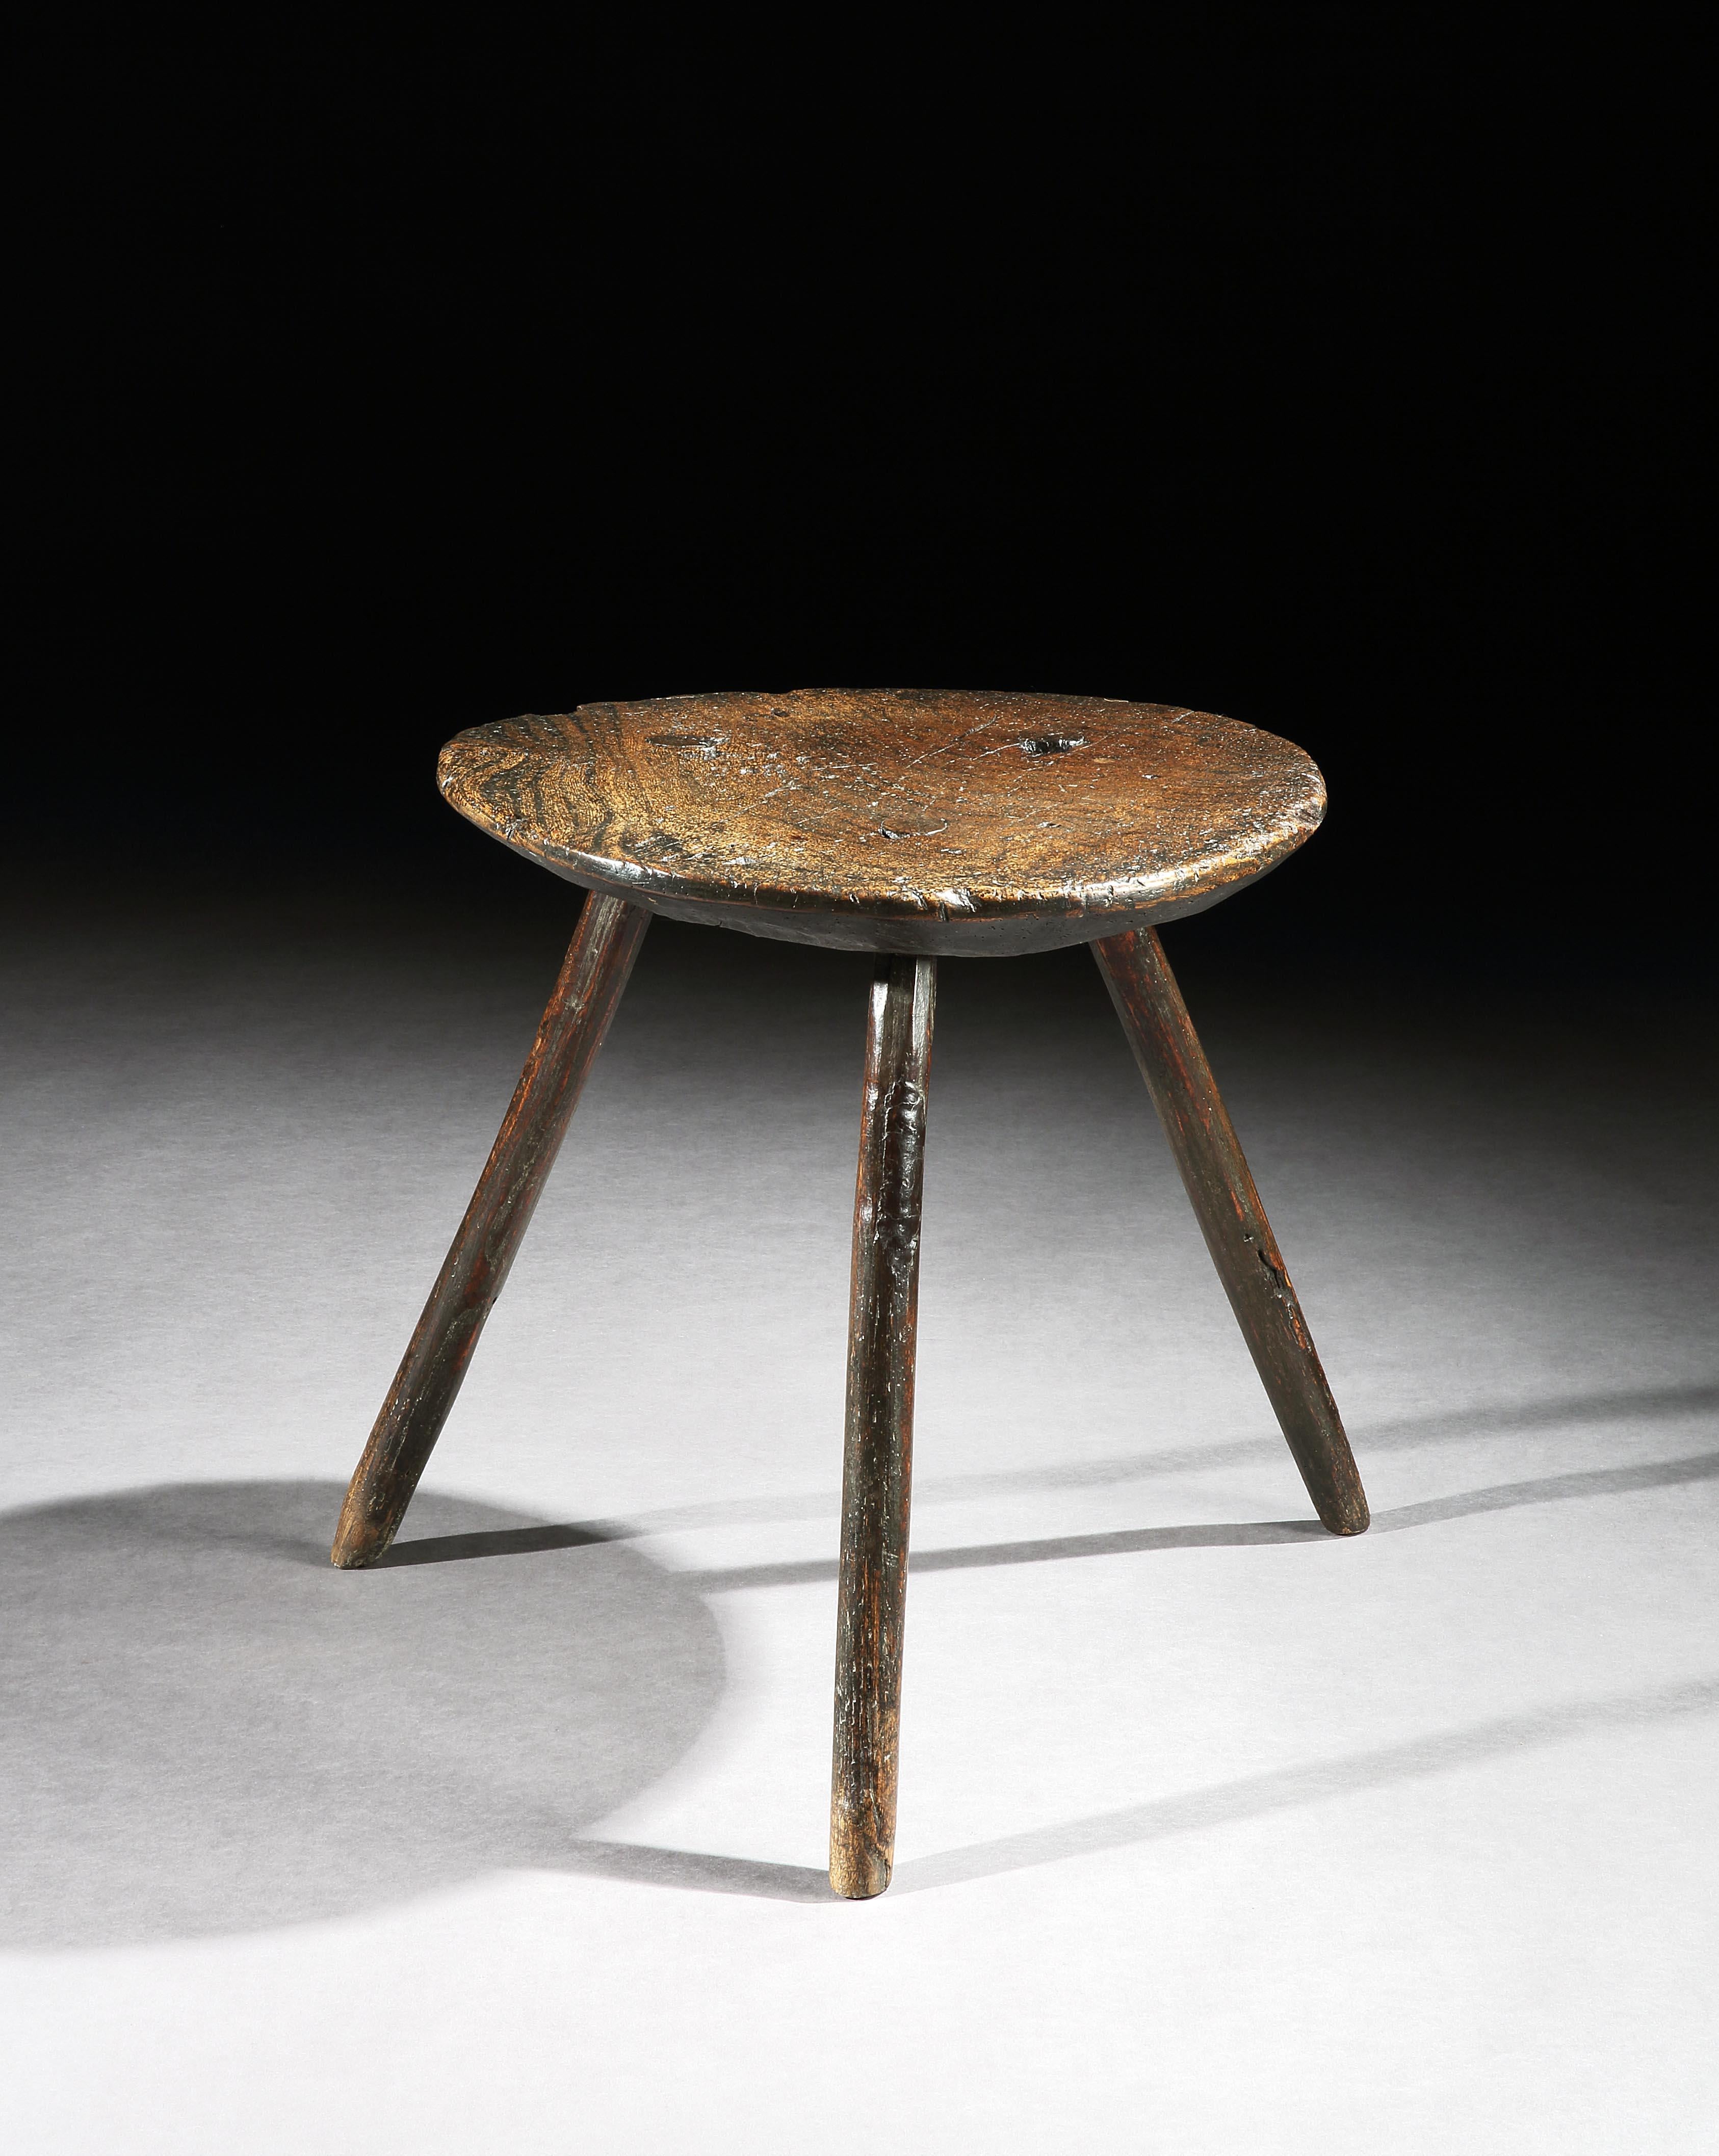 This cricket table exudes character which you expect from vernacular furniture. The thick, elm top is tactile and sculptural with beautiful figuring and an exceptional patina. It stands well on the three splayed legs which complement the sculptural